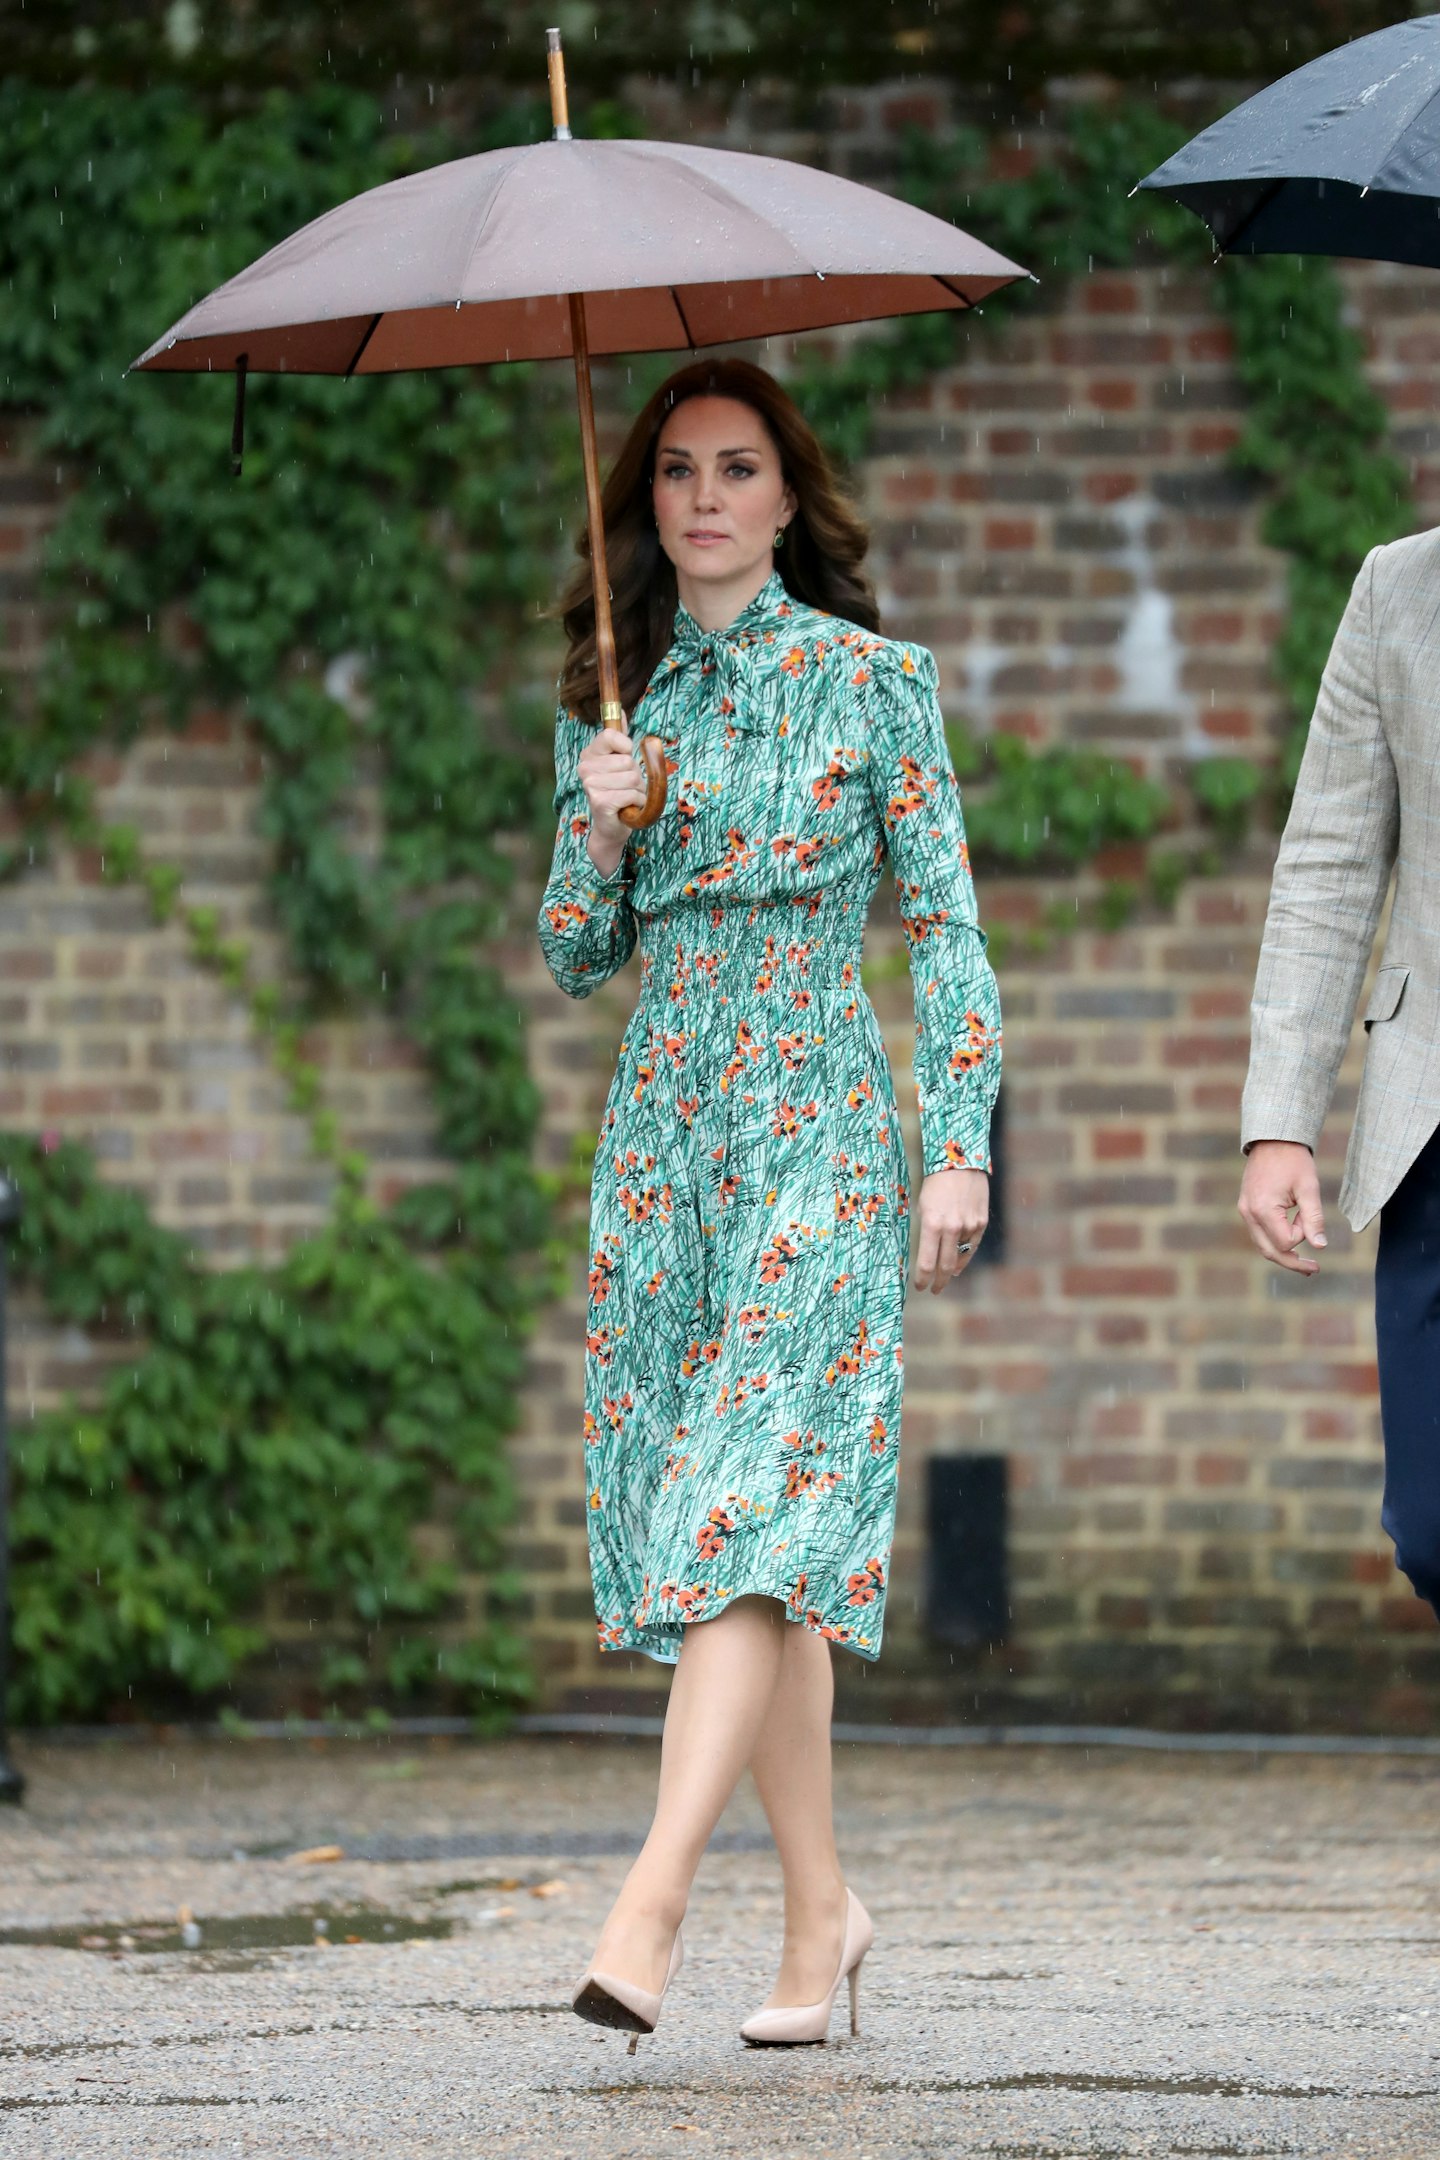 The Duchess wore a pussybow Prada dress in scribbled poppy print for a visit to Kensington Palace's Sunken Gardens, marking the 20th anniversary of Princess Diana's death